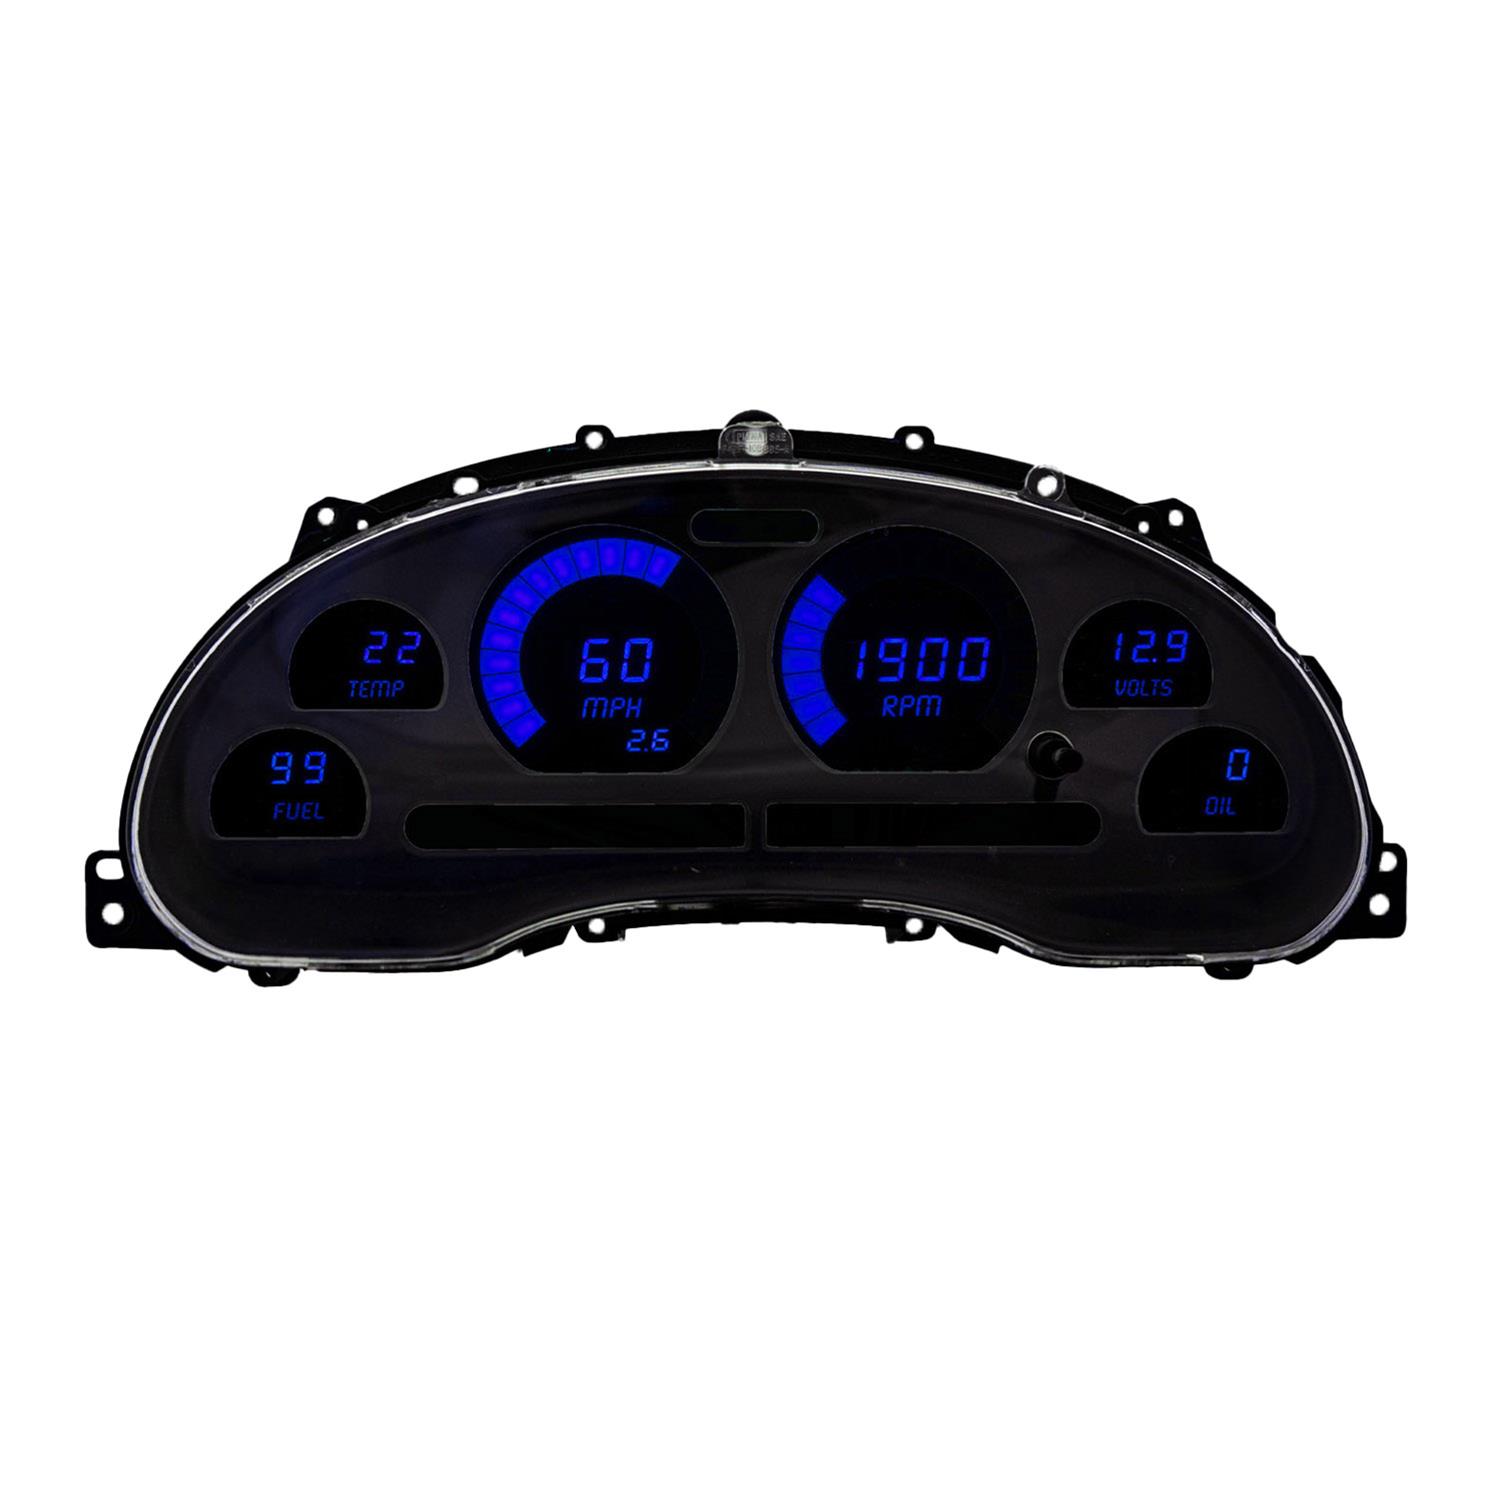 LED Direct Replacement Digital Bargraph Dash Kits for 1994-2004 Ford Mustang [Blue]